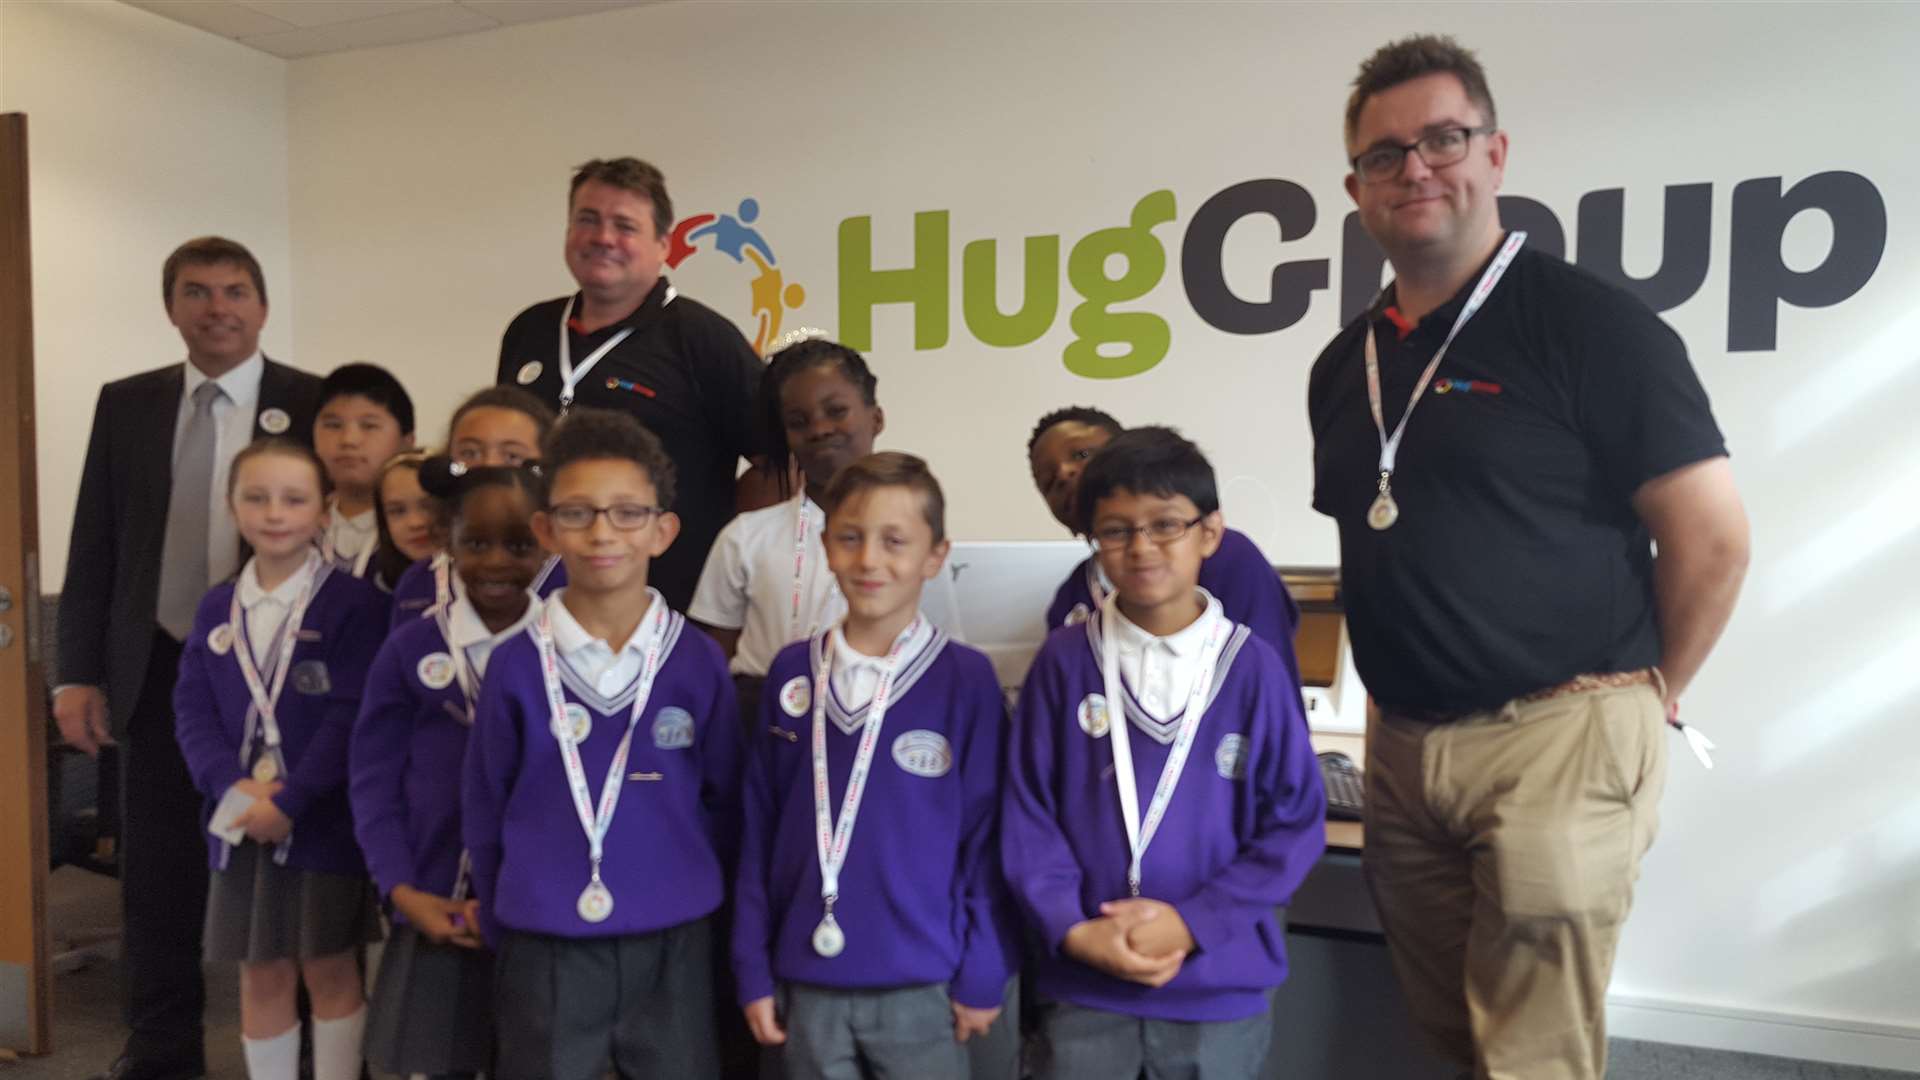 Pupils from Dartford Bridge Community Primary School with Dartford MP Gareth Johnson, left, and Hug Group founders Nick Charge, middle, and Andy Davies